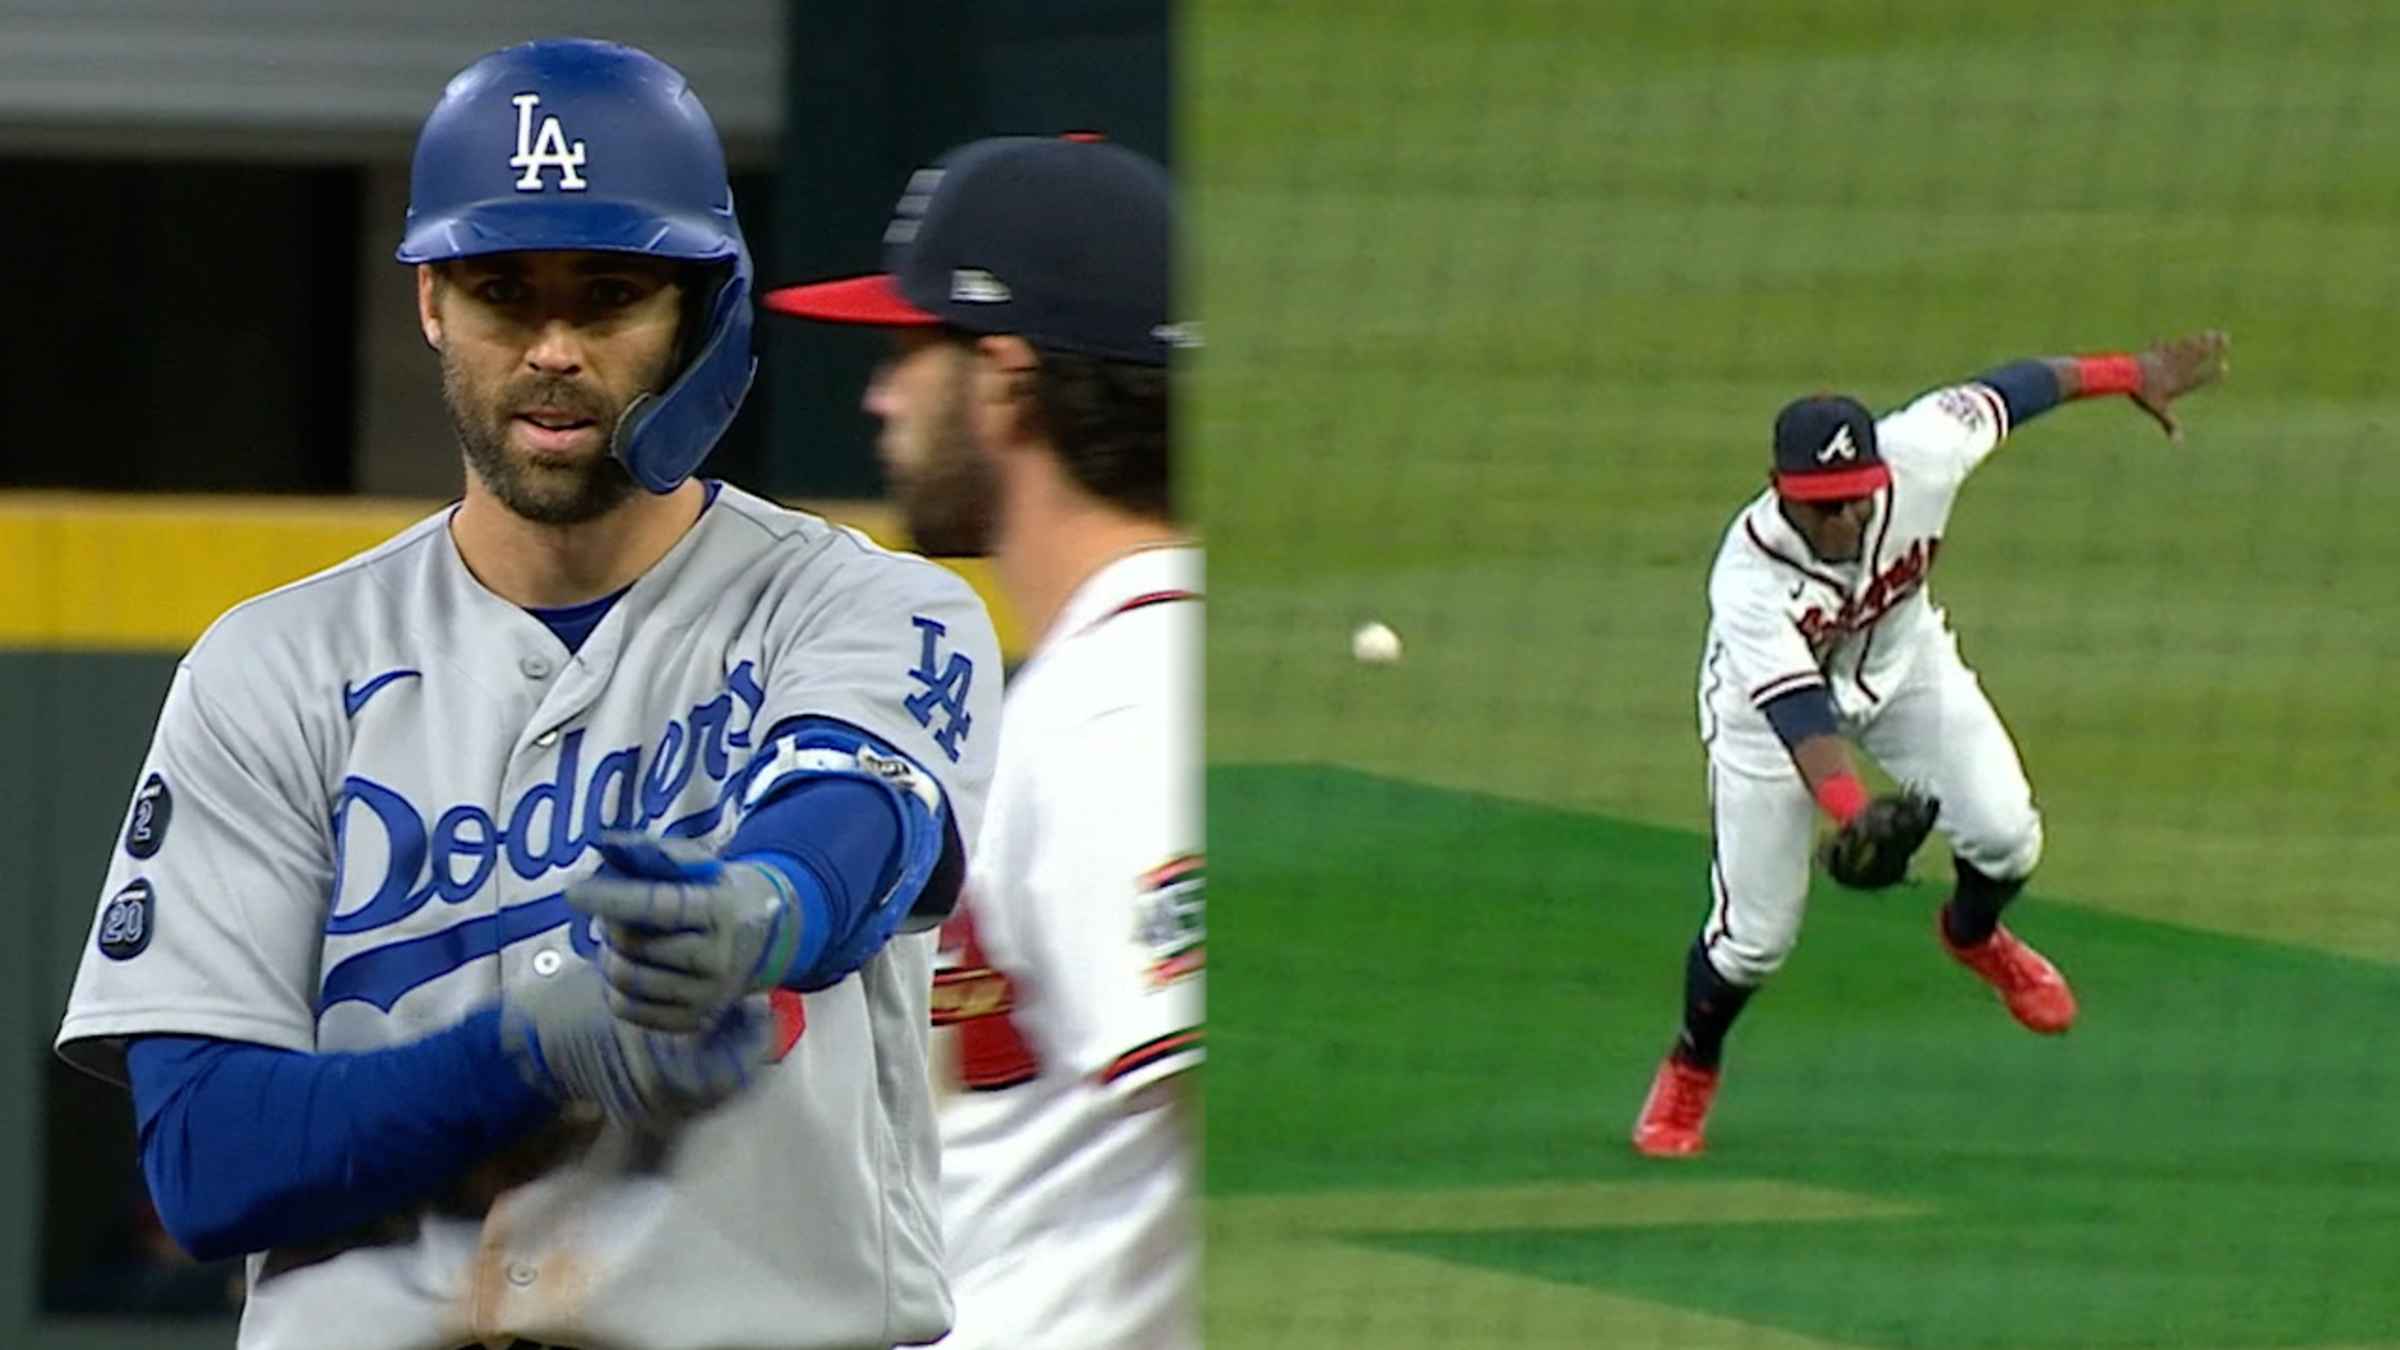 Dodgers-Braves MLB 2021 NLCS Game 2 live stream (10/17) How to